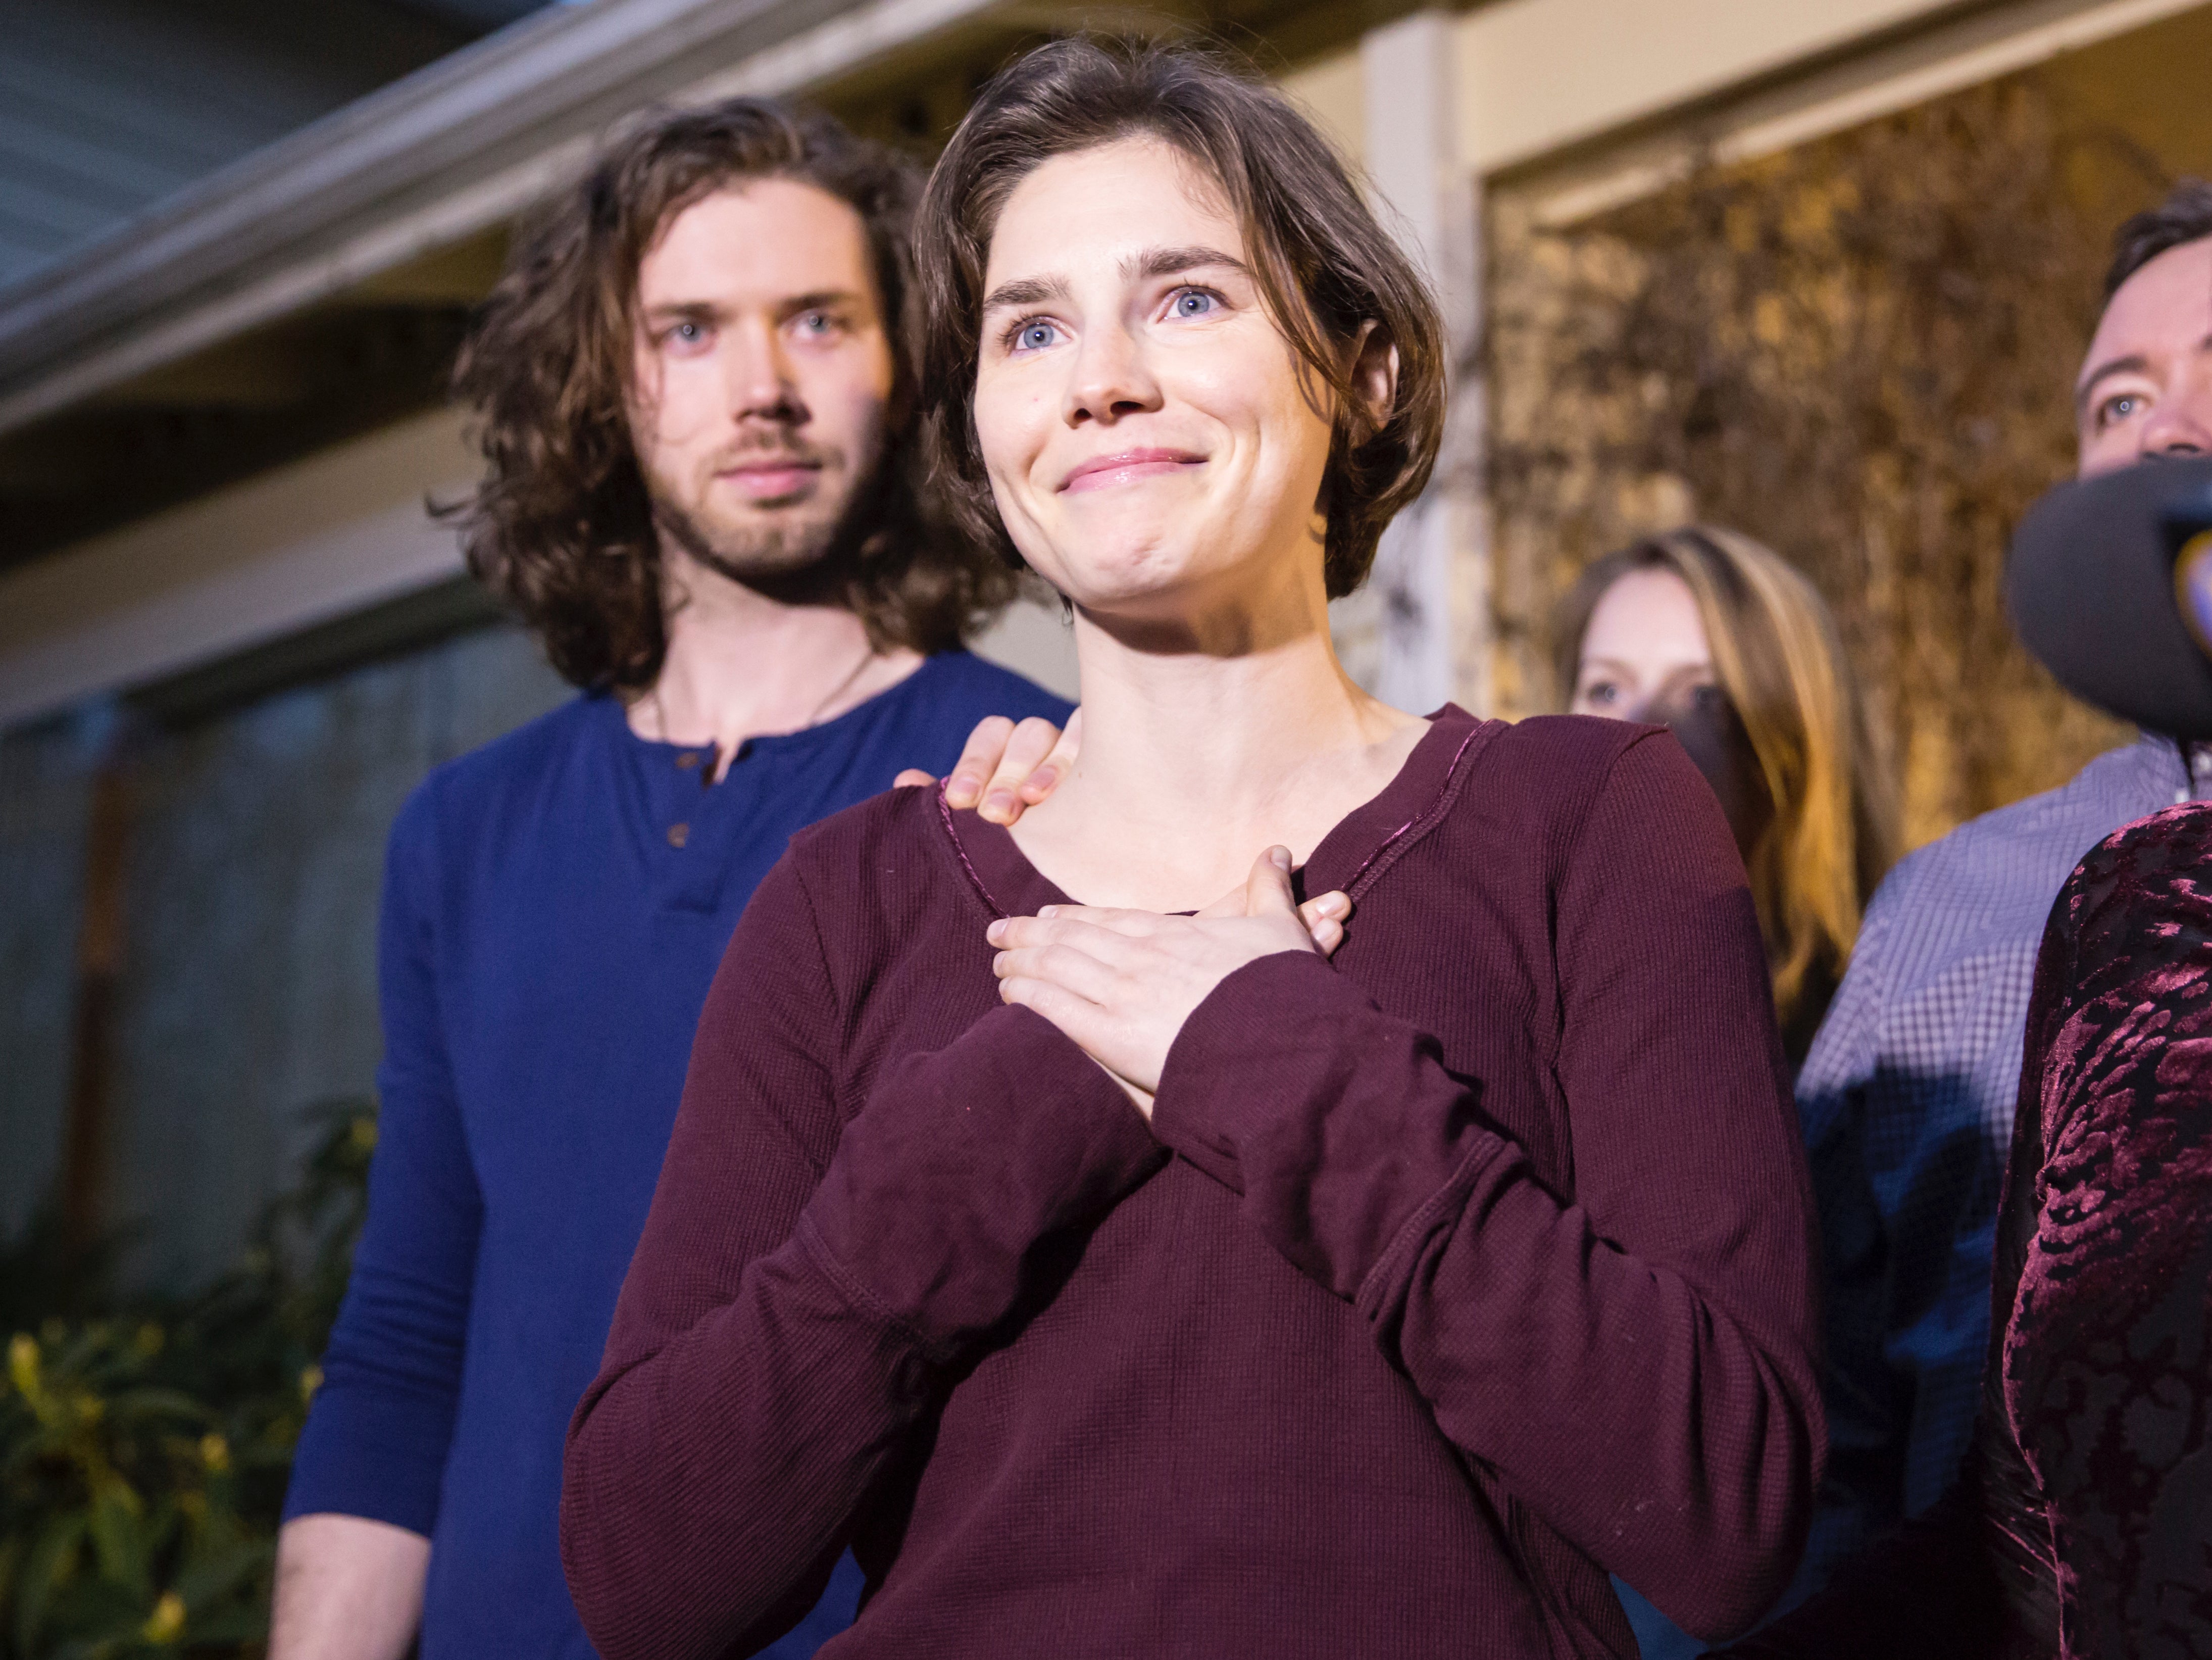 Amanda Knox takes a dig at Trump while the election result is still in the ballot